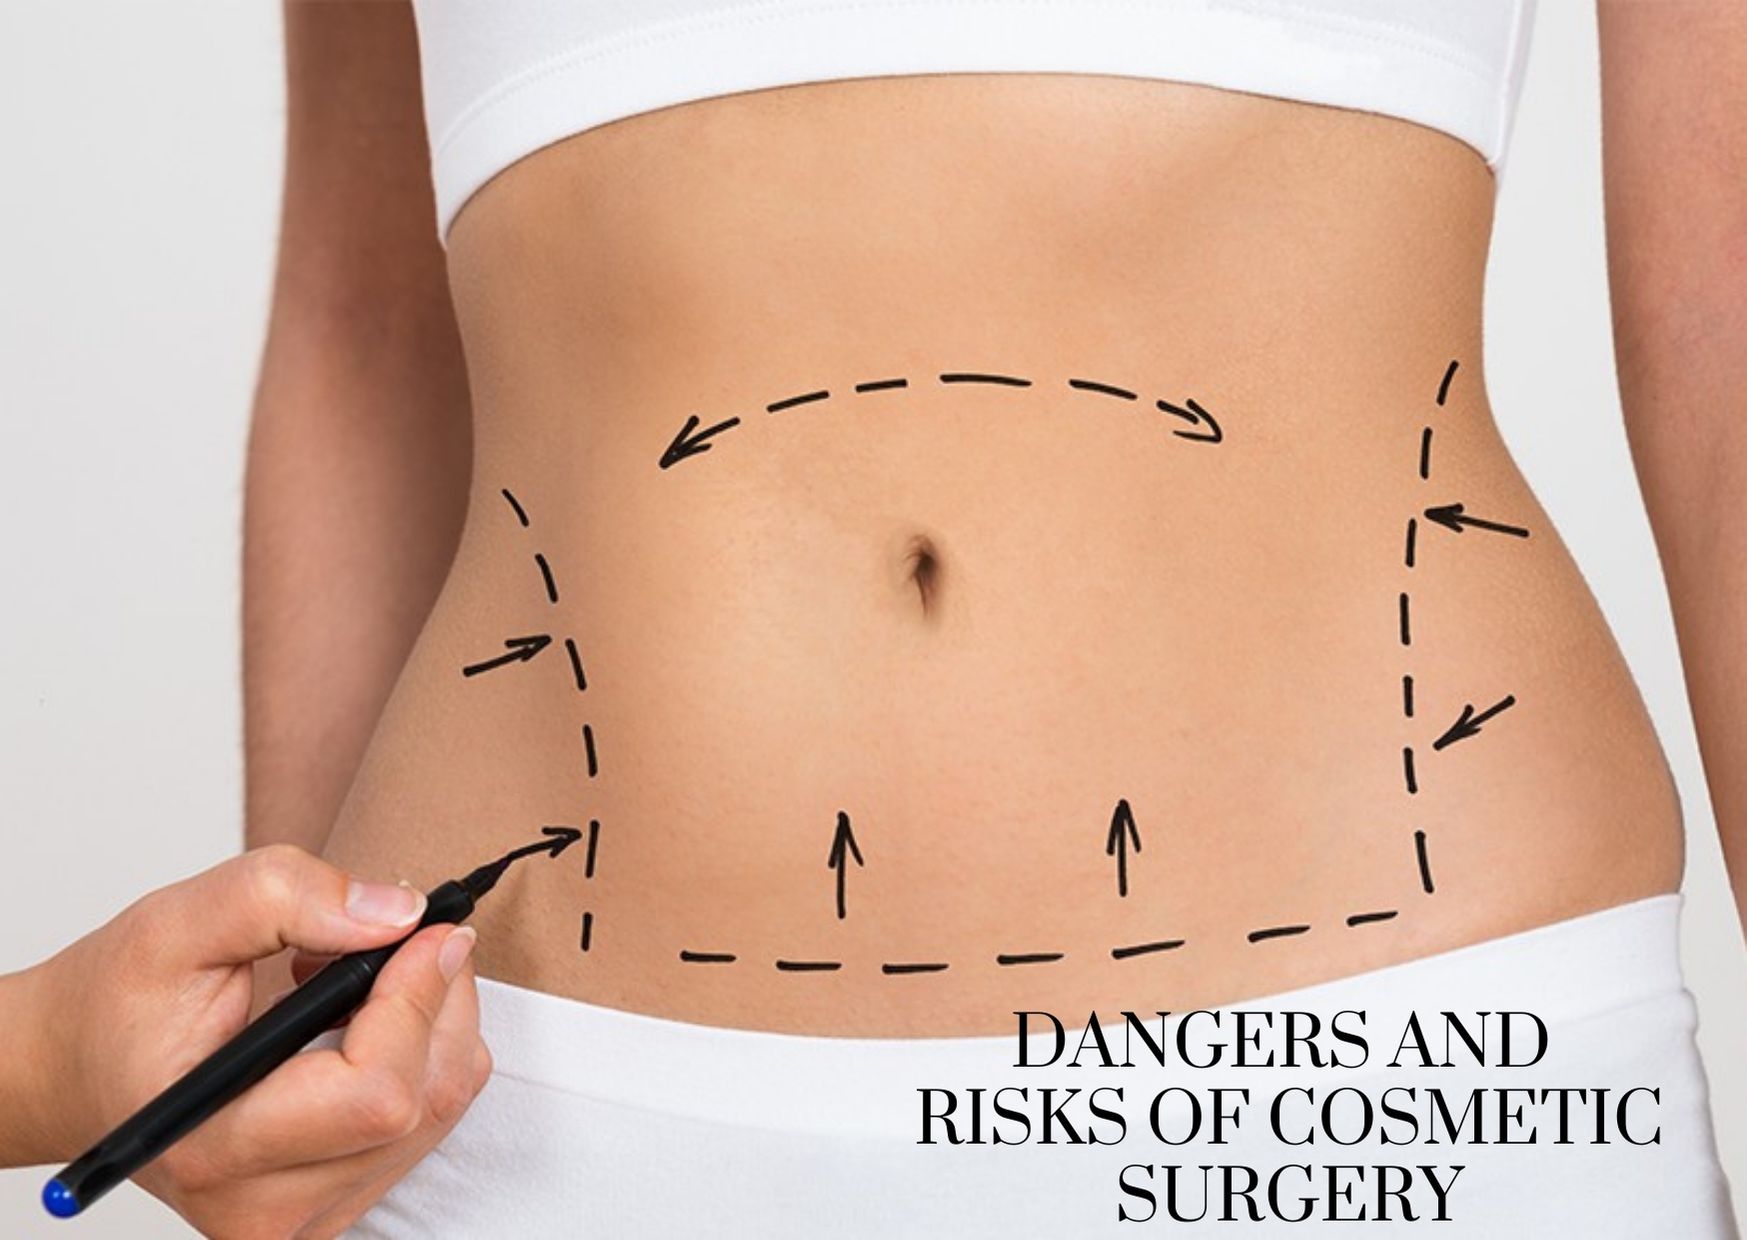 The Risks of Cosmetic Surgery: Here’s what you need to know!